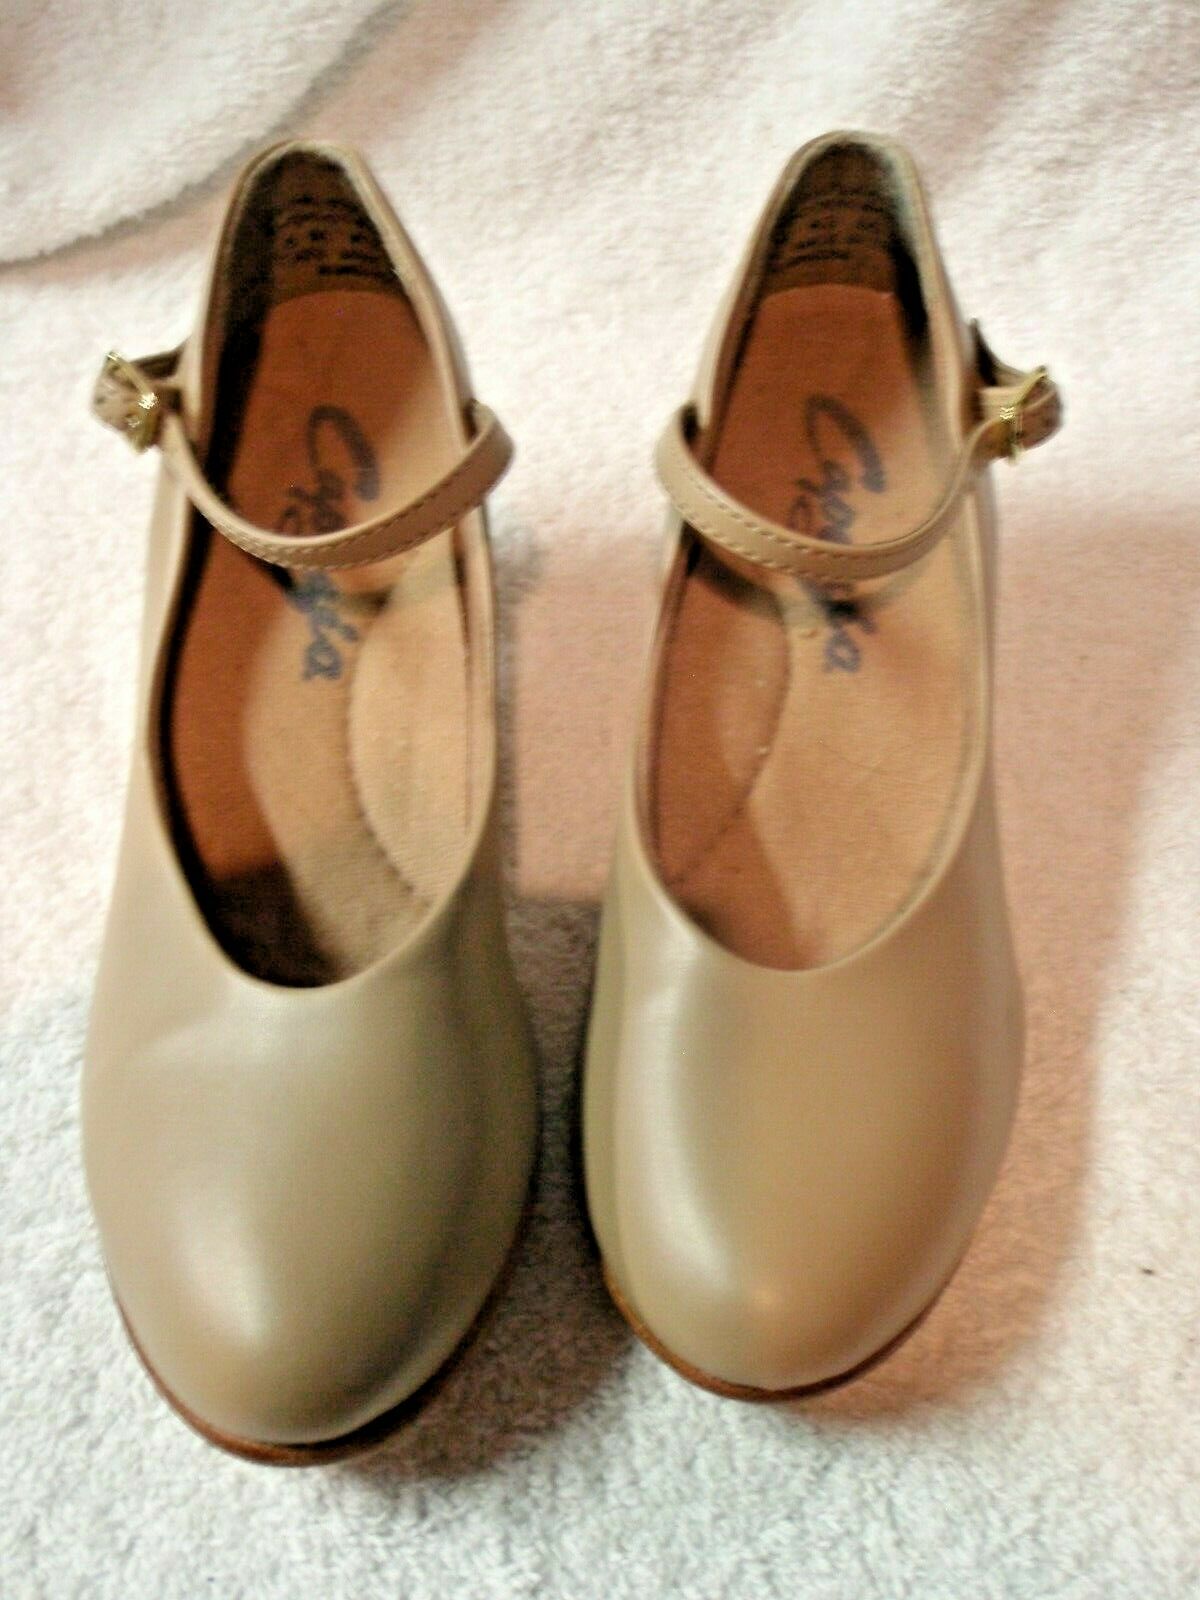 Capezia Size Women's 6m Taupe/tan Character Dance Shoes 2" Heel Leather Sole